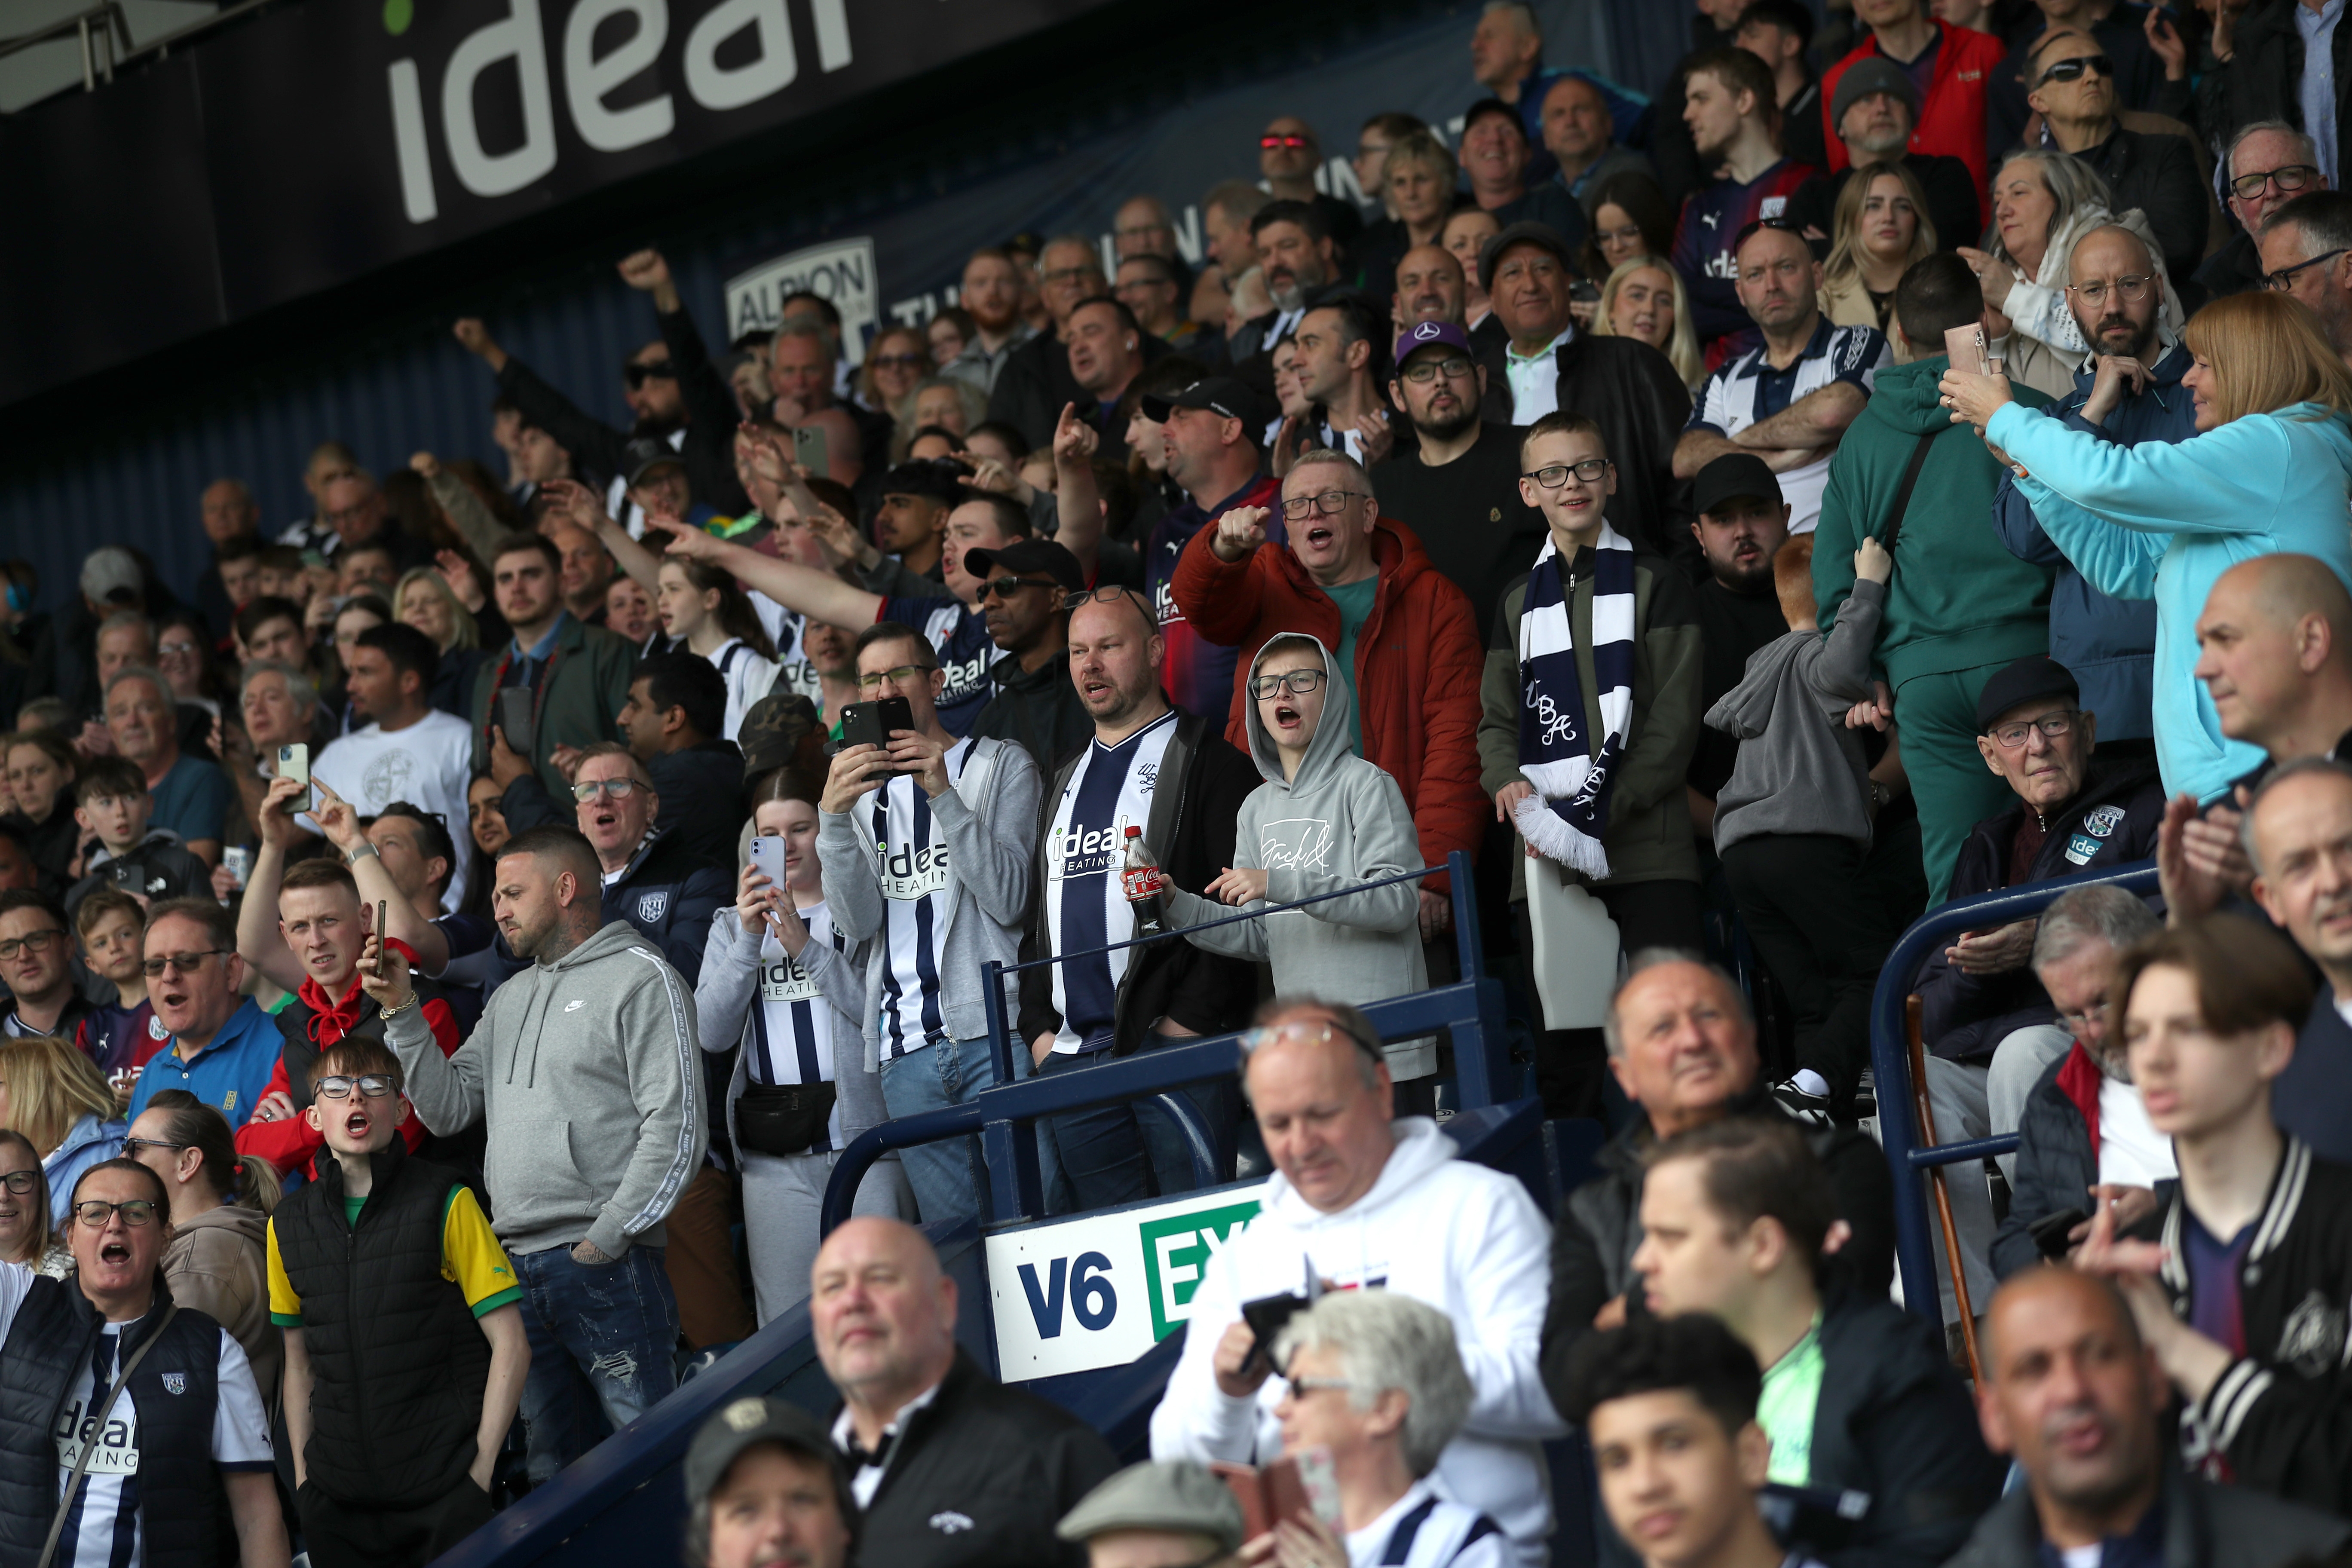 A general view of Albion fans at the Preston game